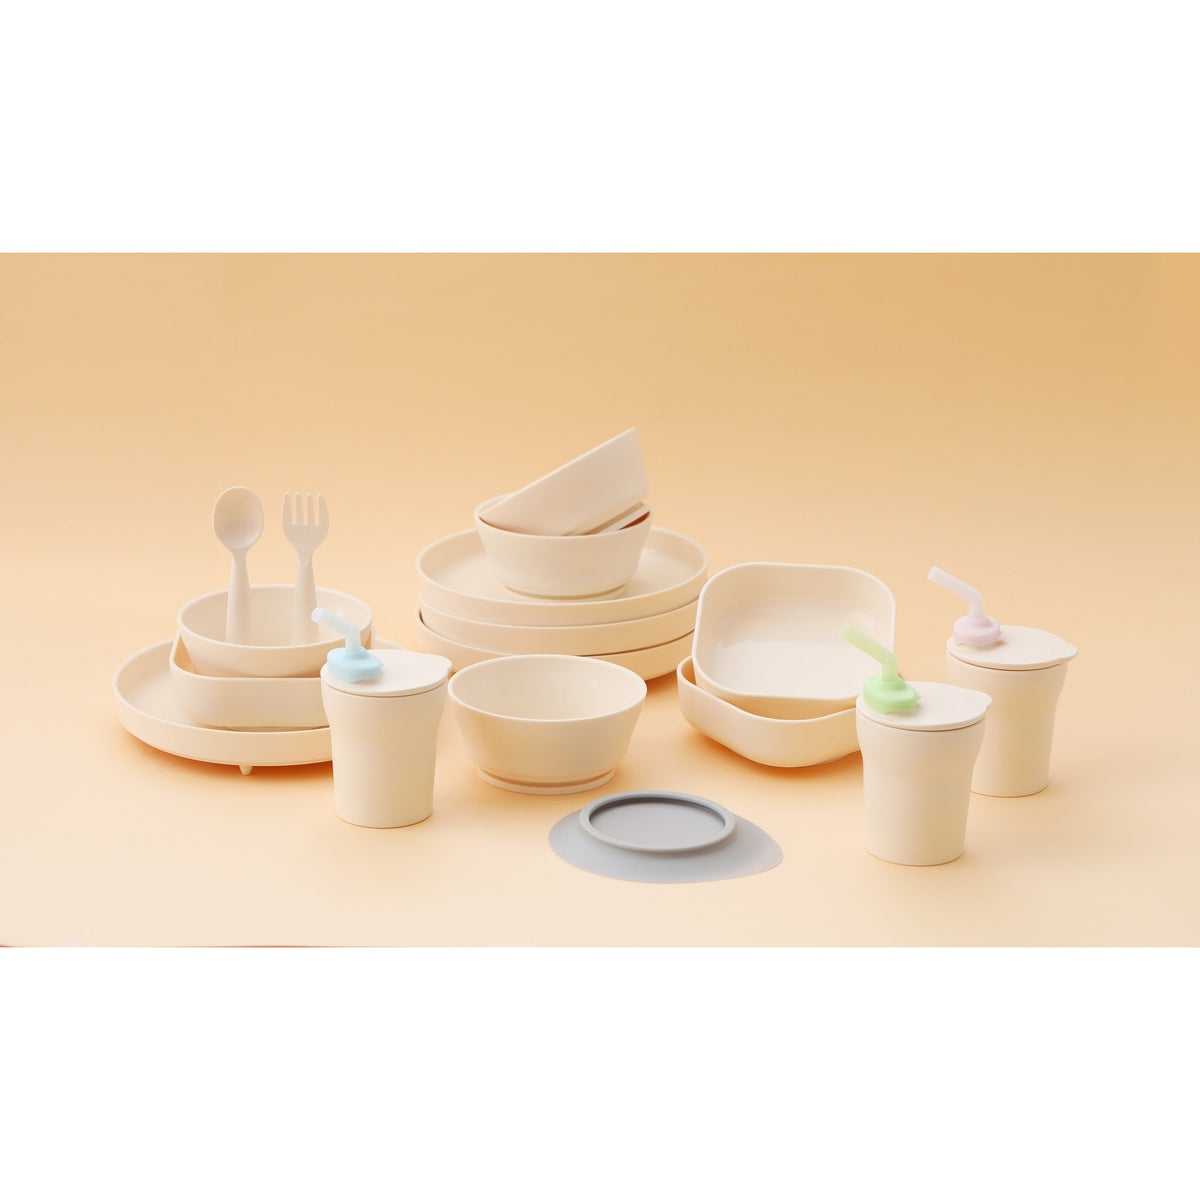 miniware-first-bite-set-pla-cereal-suction-bowl-vanilla-+-silicone-spoon-and-cover-in-cotton-grey- (22)